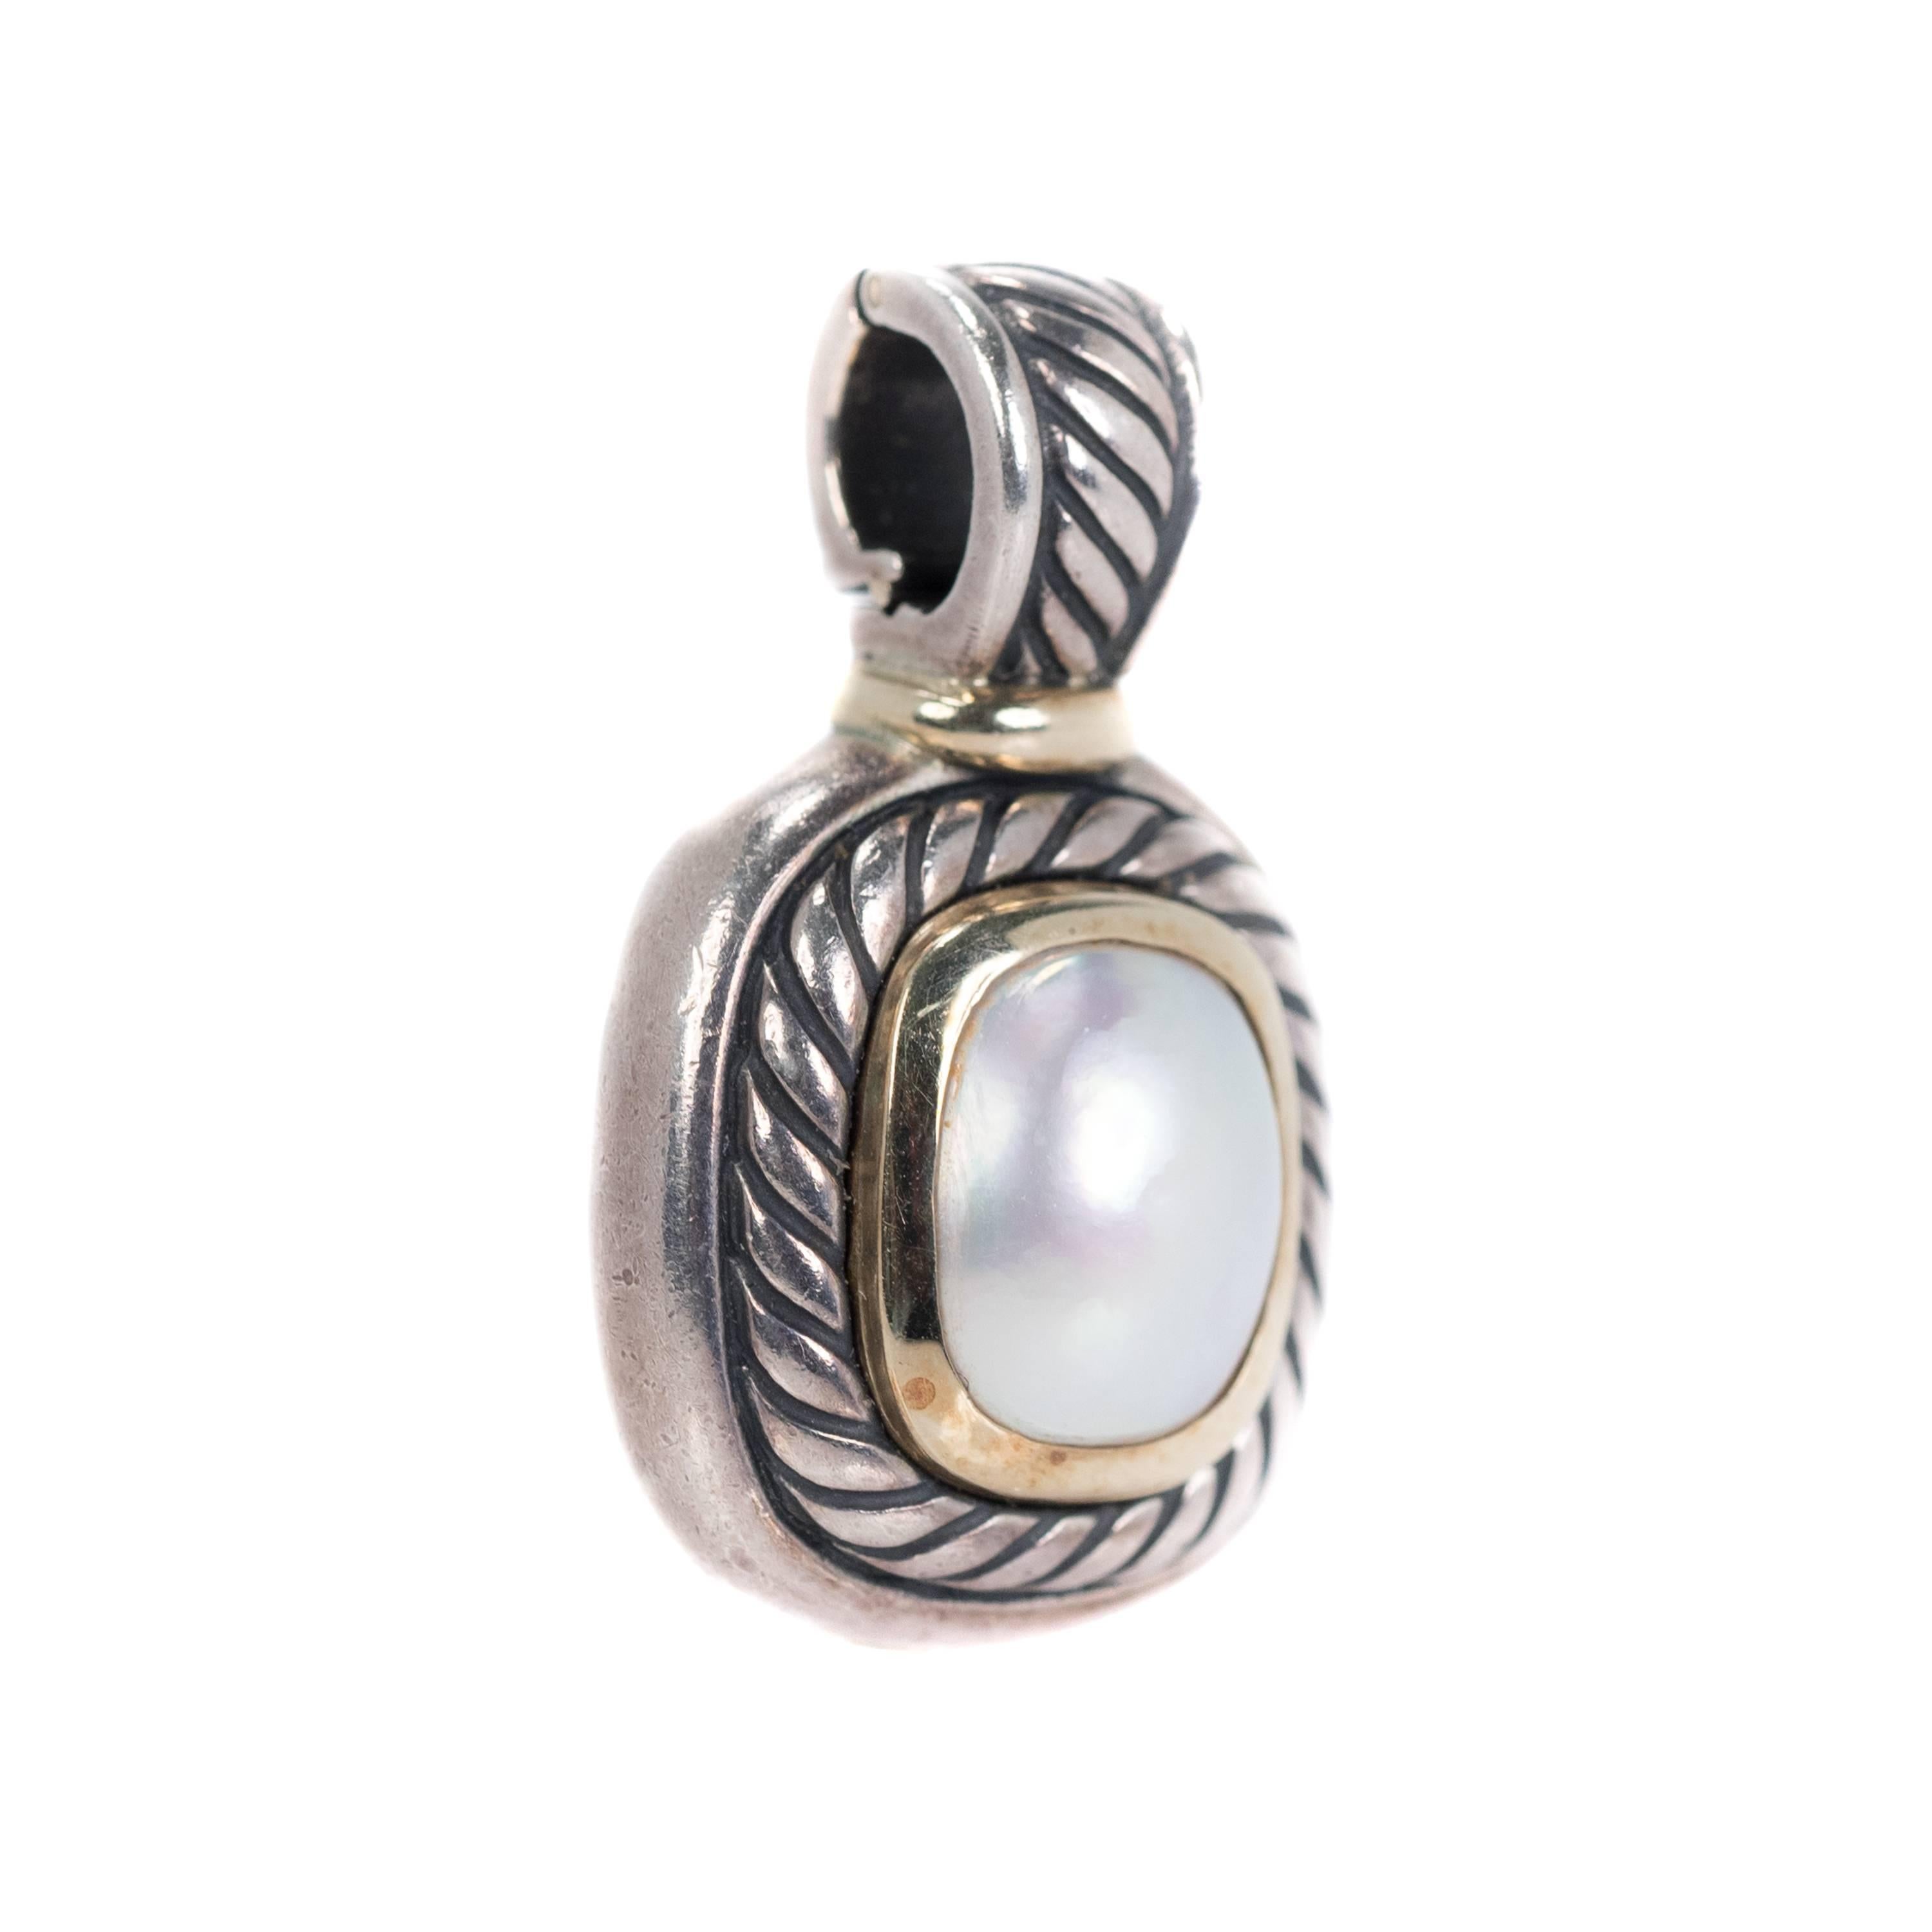 David Yurman Pearl Pendant - Sterling Silver, 14k Yellow Gold, Pearl

Features a large Oval Pearl in a rectangular two tone cable frame. 
The silvery white, rainbow lustre Pearl cabochon is securely set in a 14k Yellow Gold bezel frame. The gold is